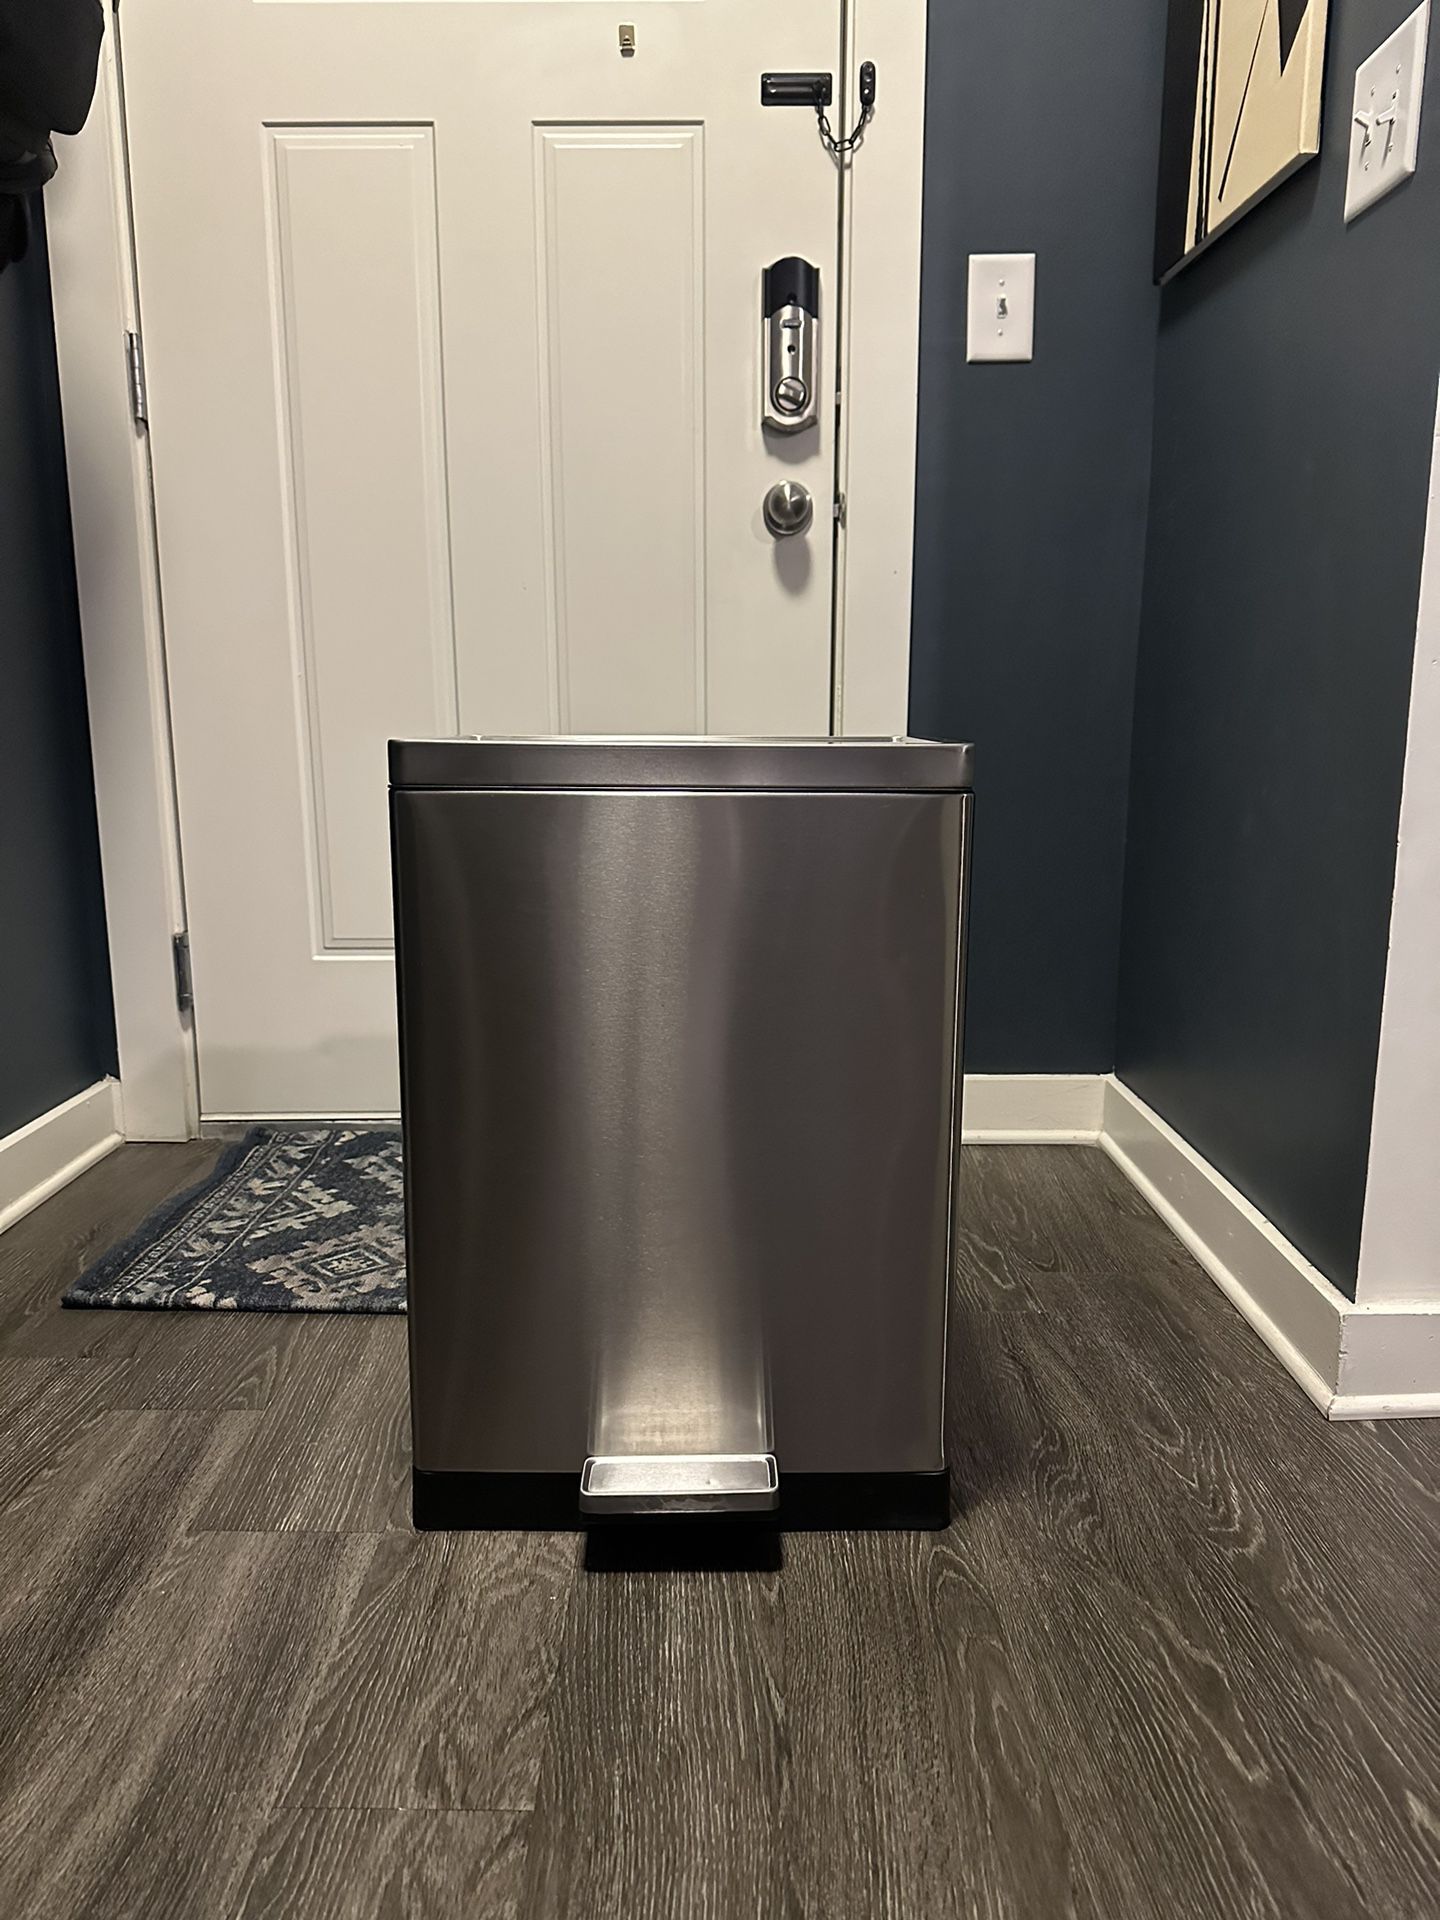 Stainless Steel Trash Can (10.57 Gallon)